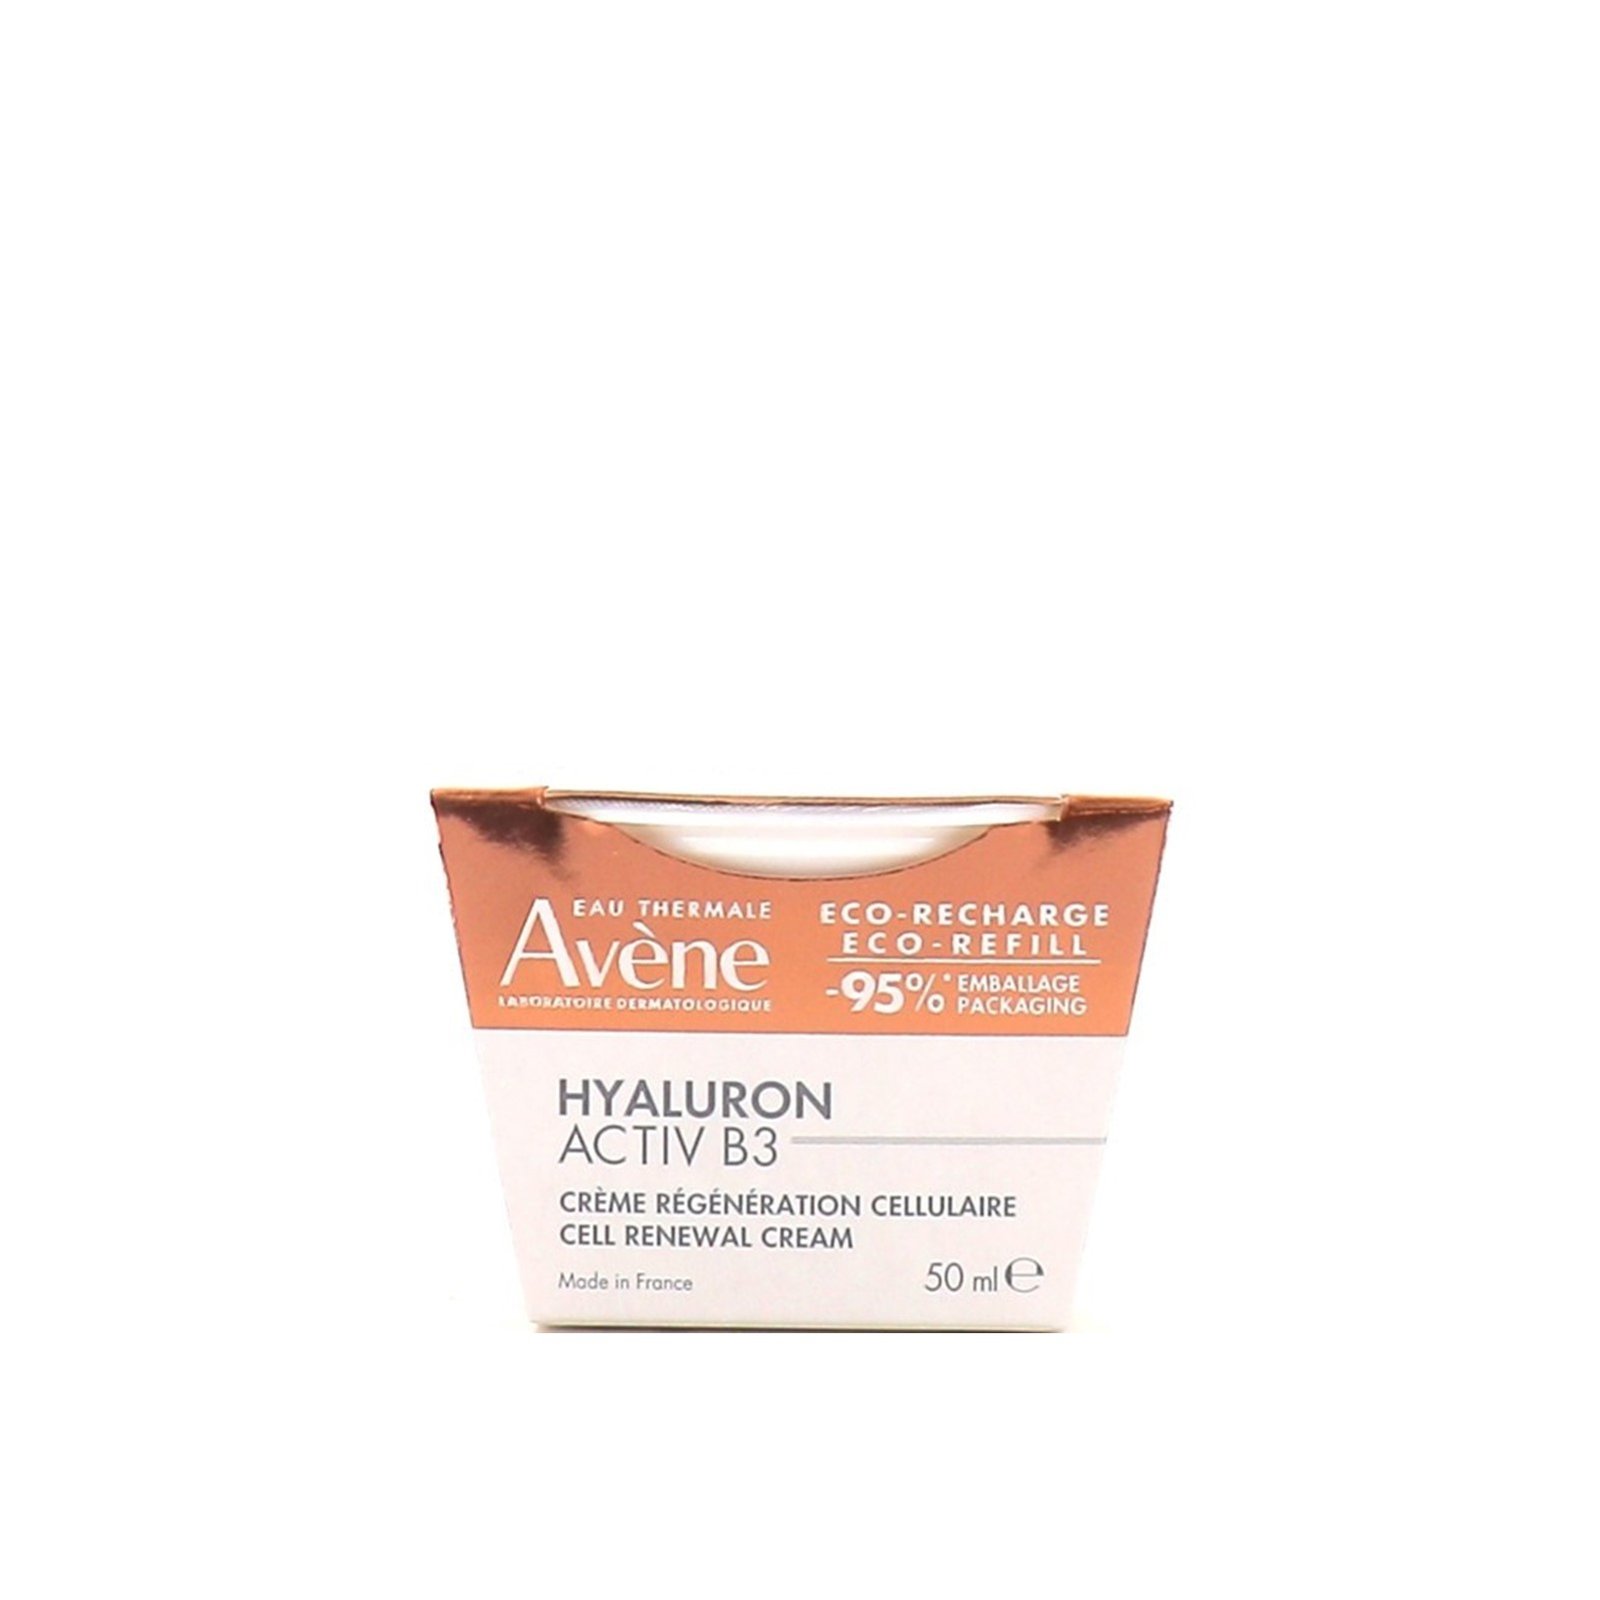 Avène Hyaluron Activ B3 Cell Renewal Cream Eco-Refill 50ml